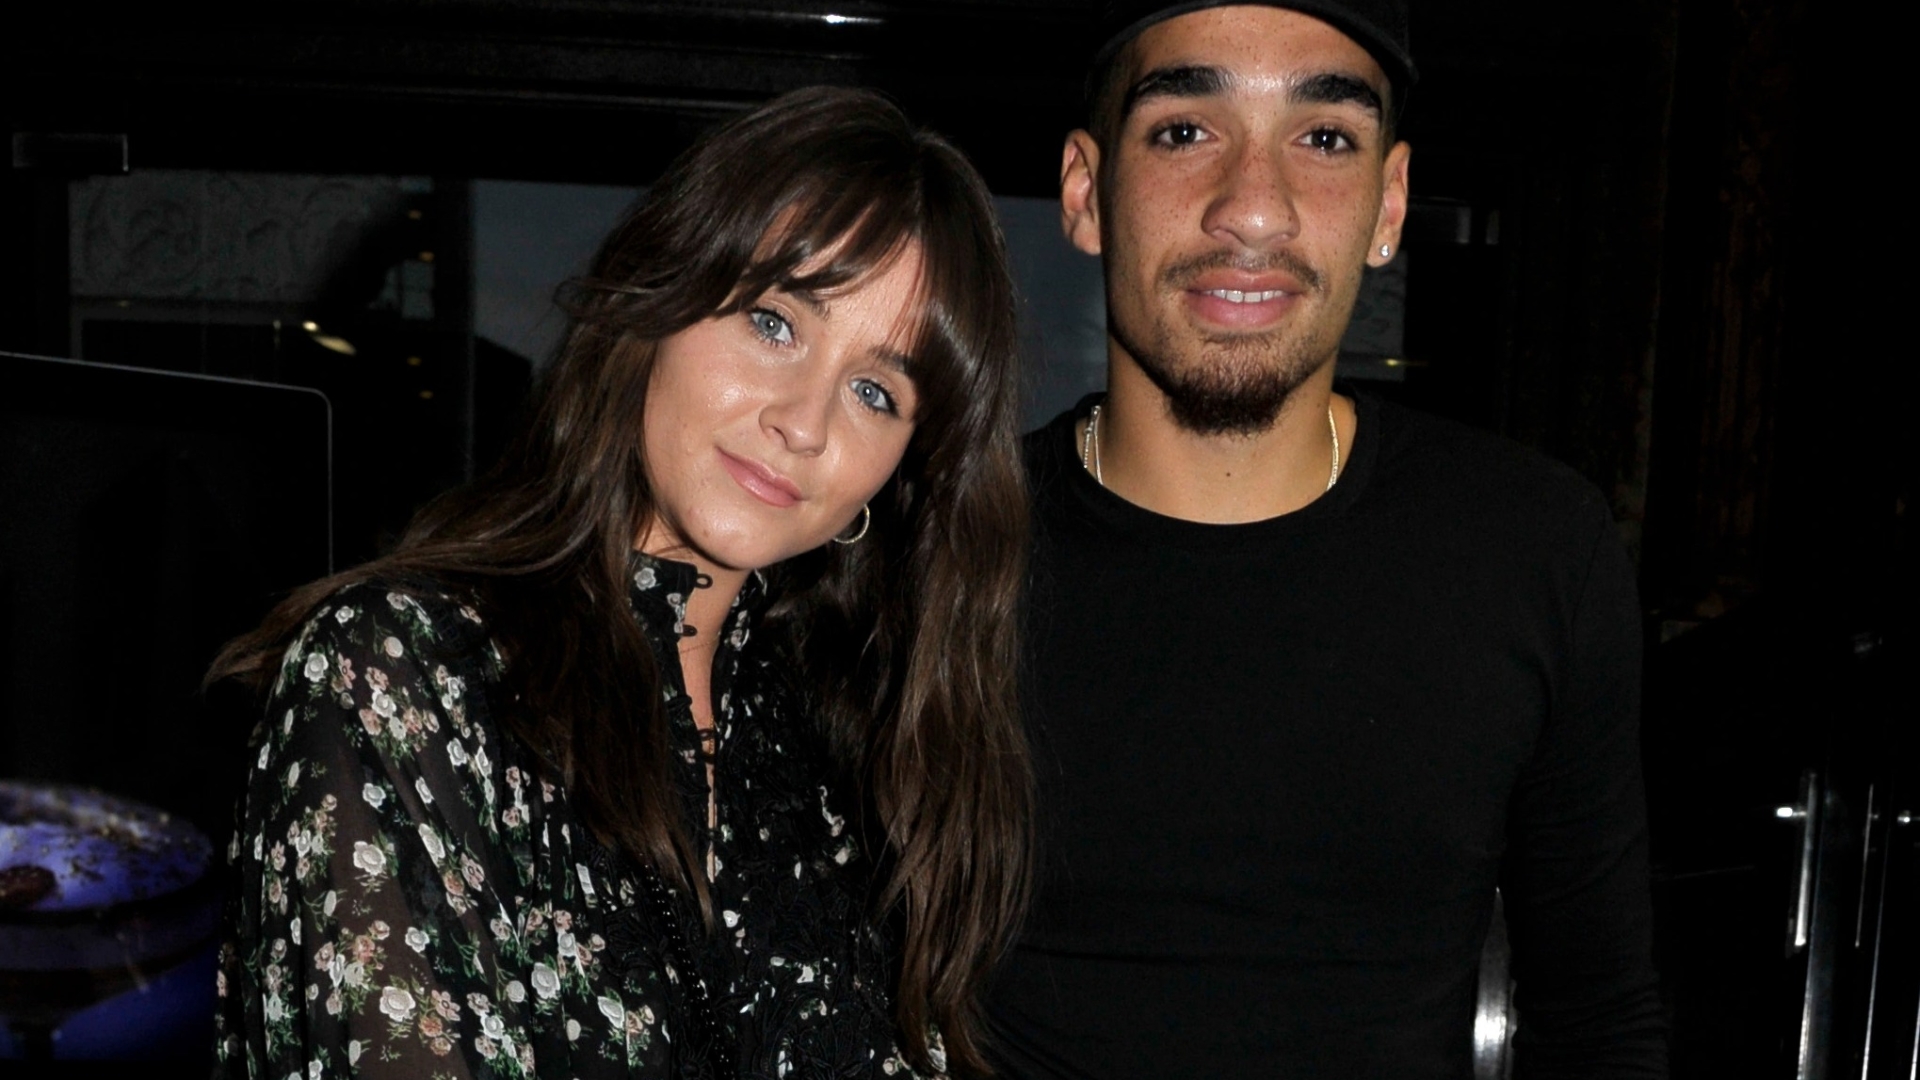 Coronation Street's Brooke Vincent announces she's engaged to footballer Kean Bryan